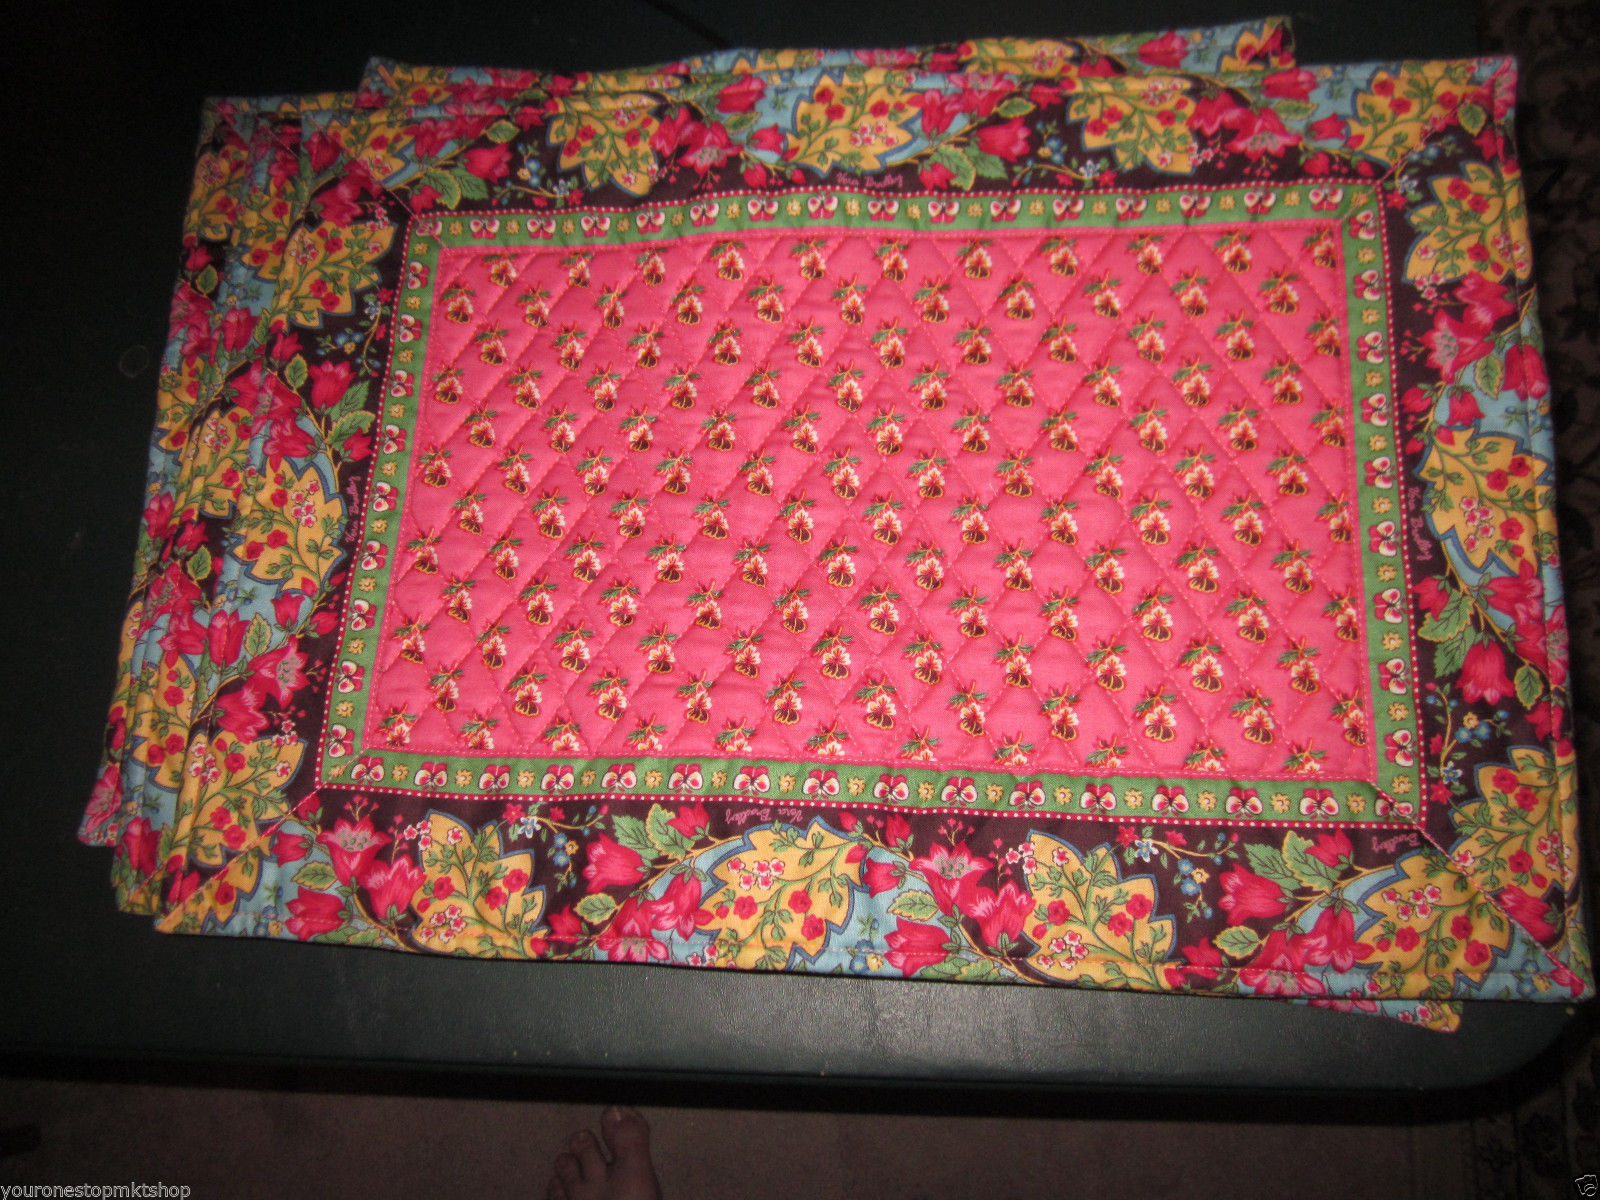 Six 6 Vera Bradley "Pink Pansy" Placemats place mats Very good condition Retired - $247.49